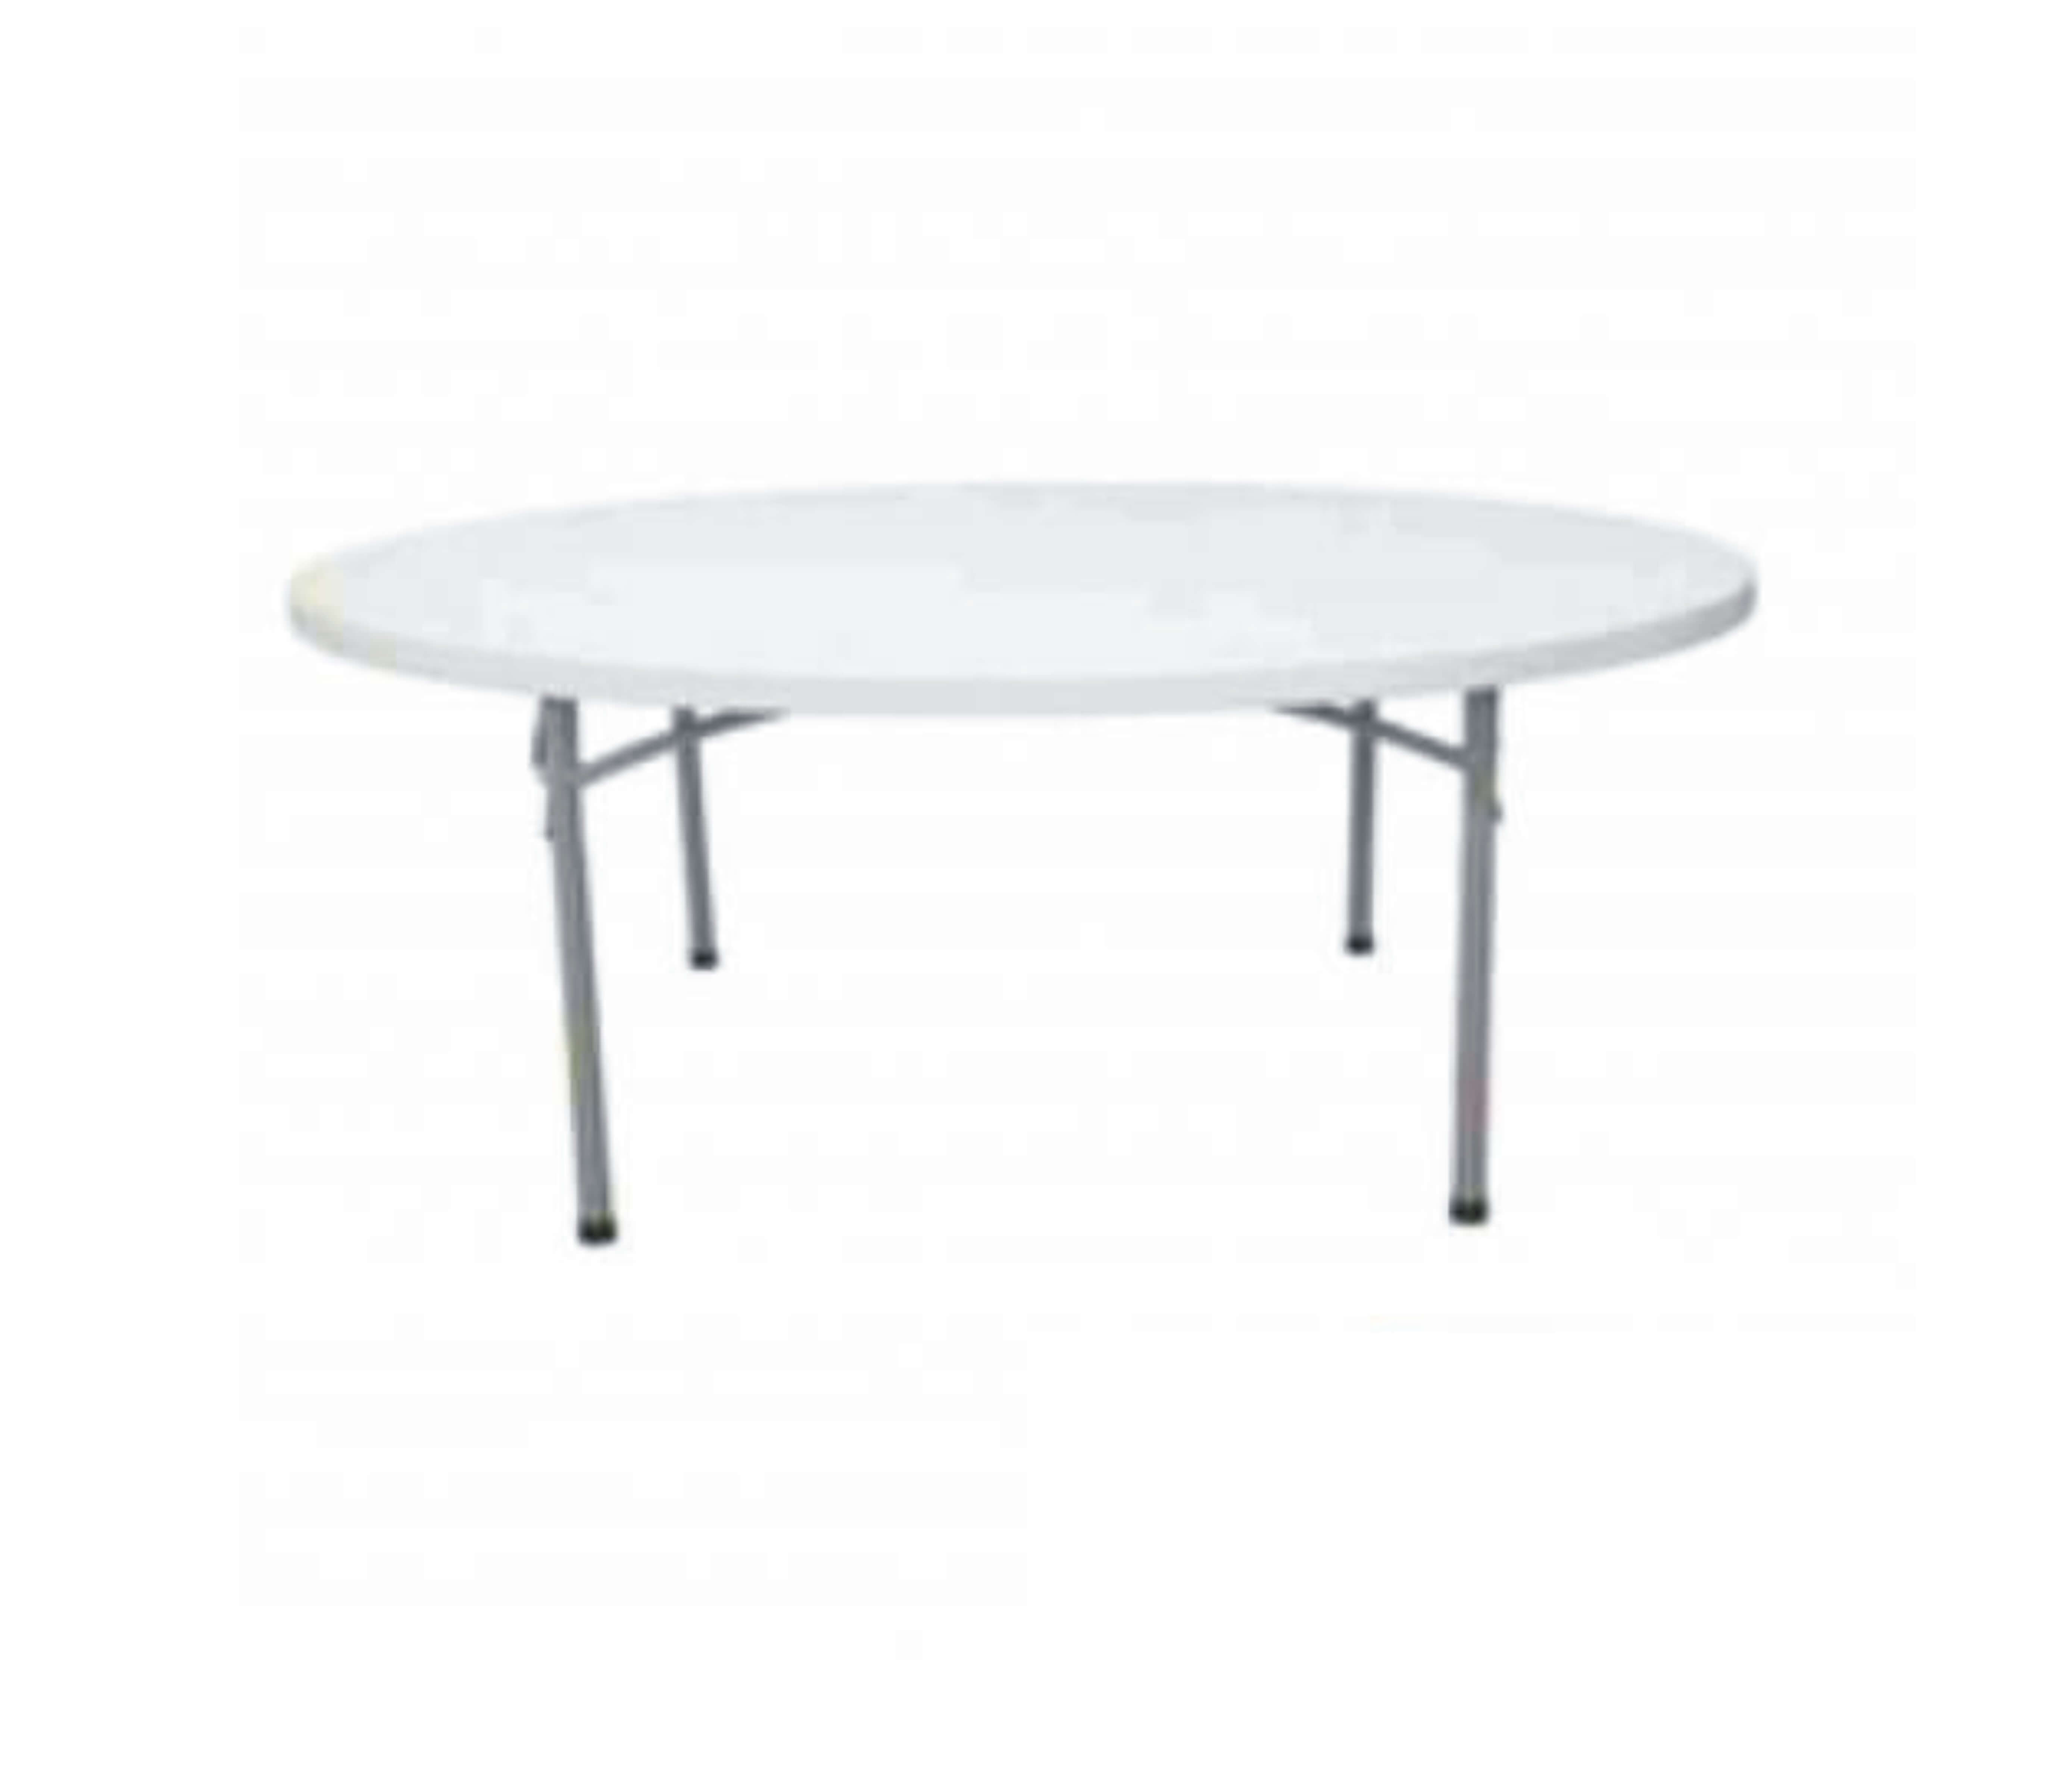 Cycad Round Folding Table 10 12 Seater within dimensions 5547 X 4802